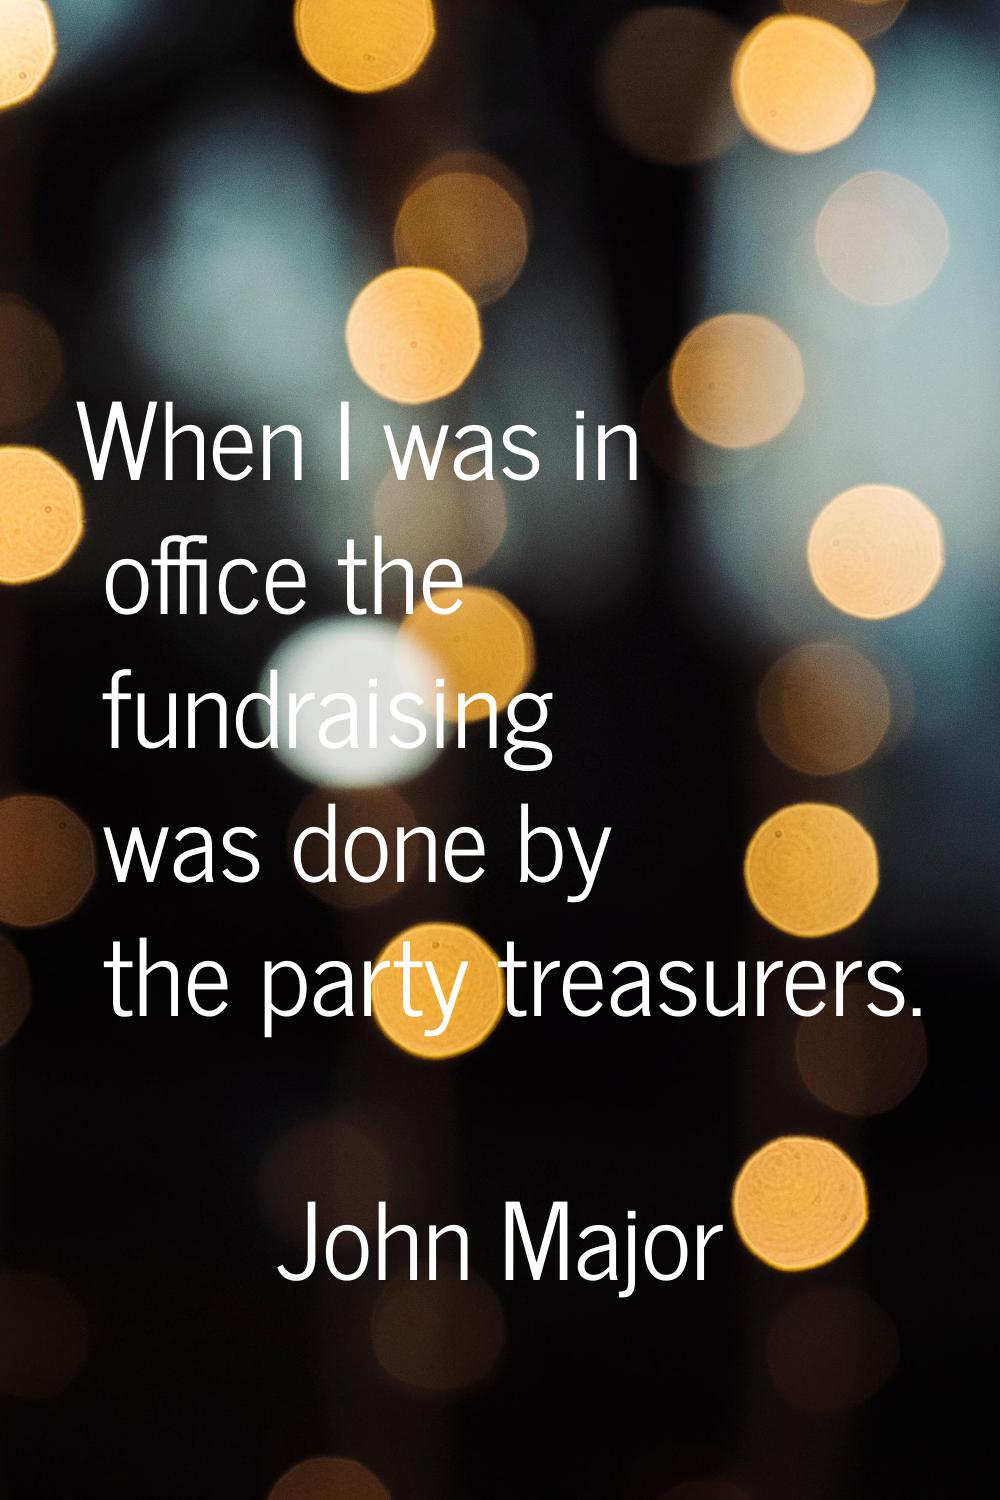 When I was in office the fundraising was done by the party treasurers.